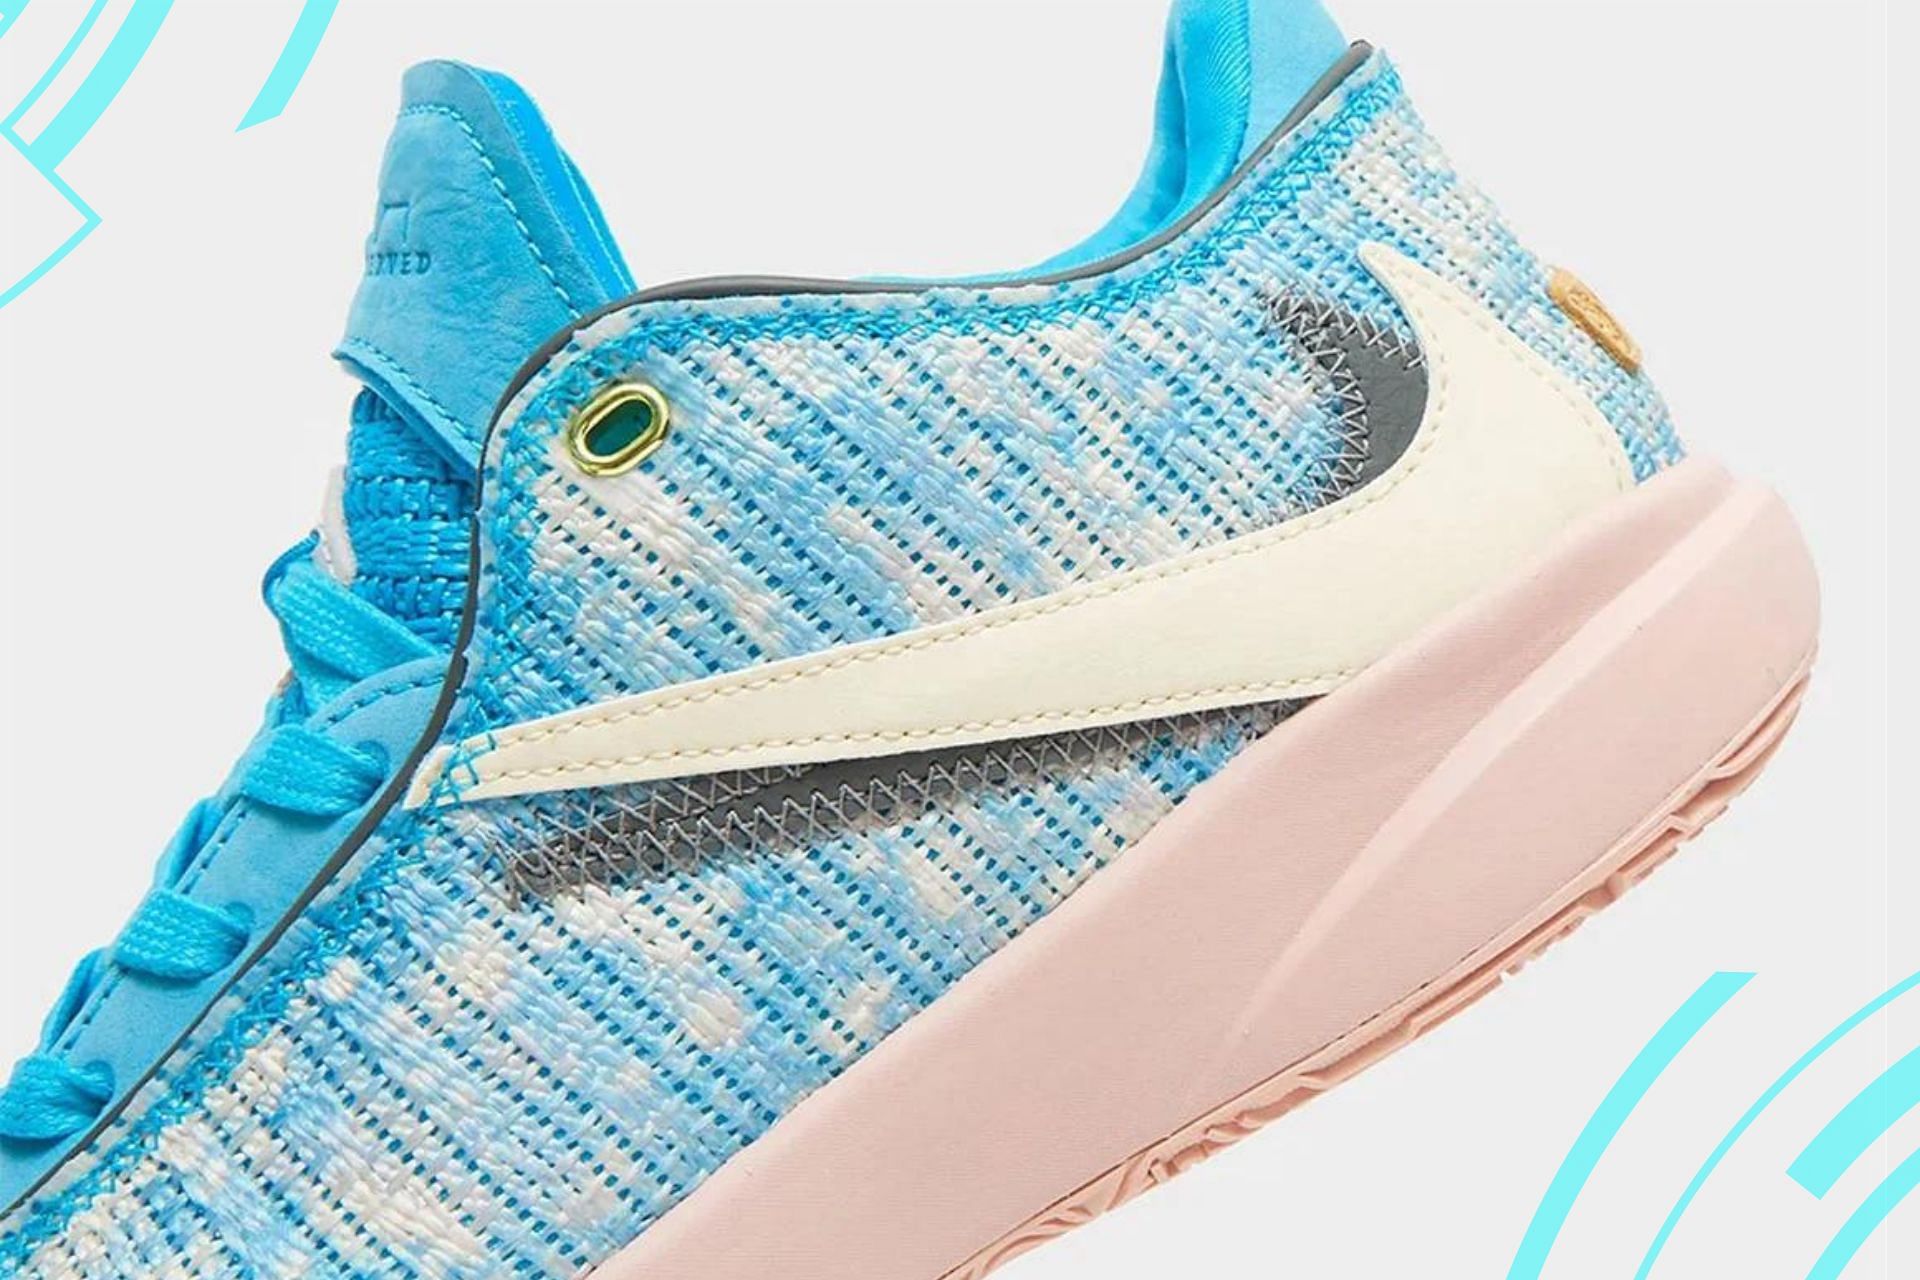 All-Star: Nike 20 “All-Star” shoes: Where to buy, and more details explored